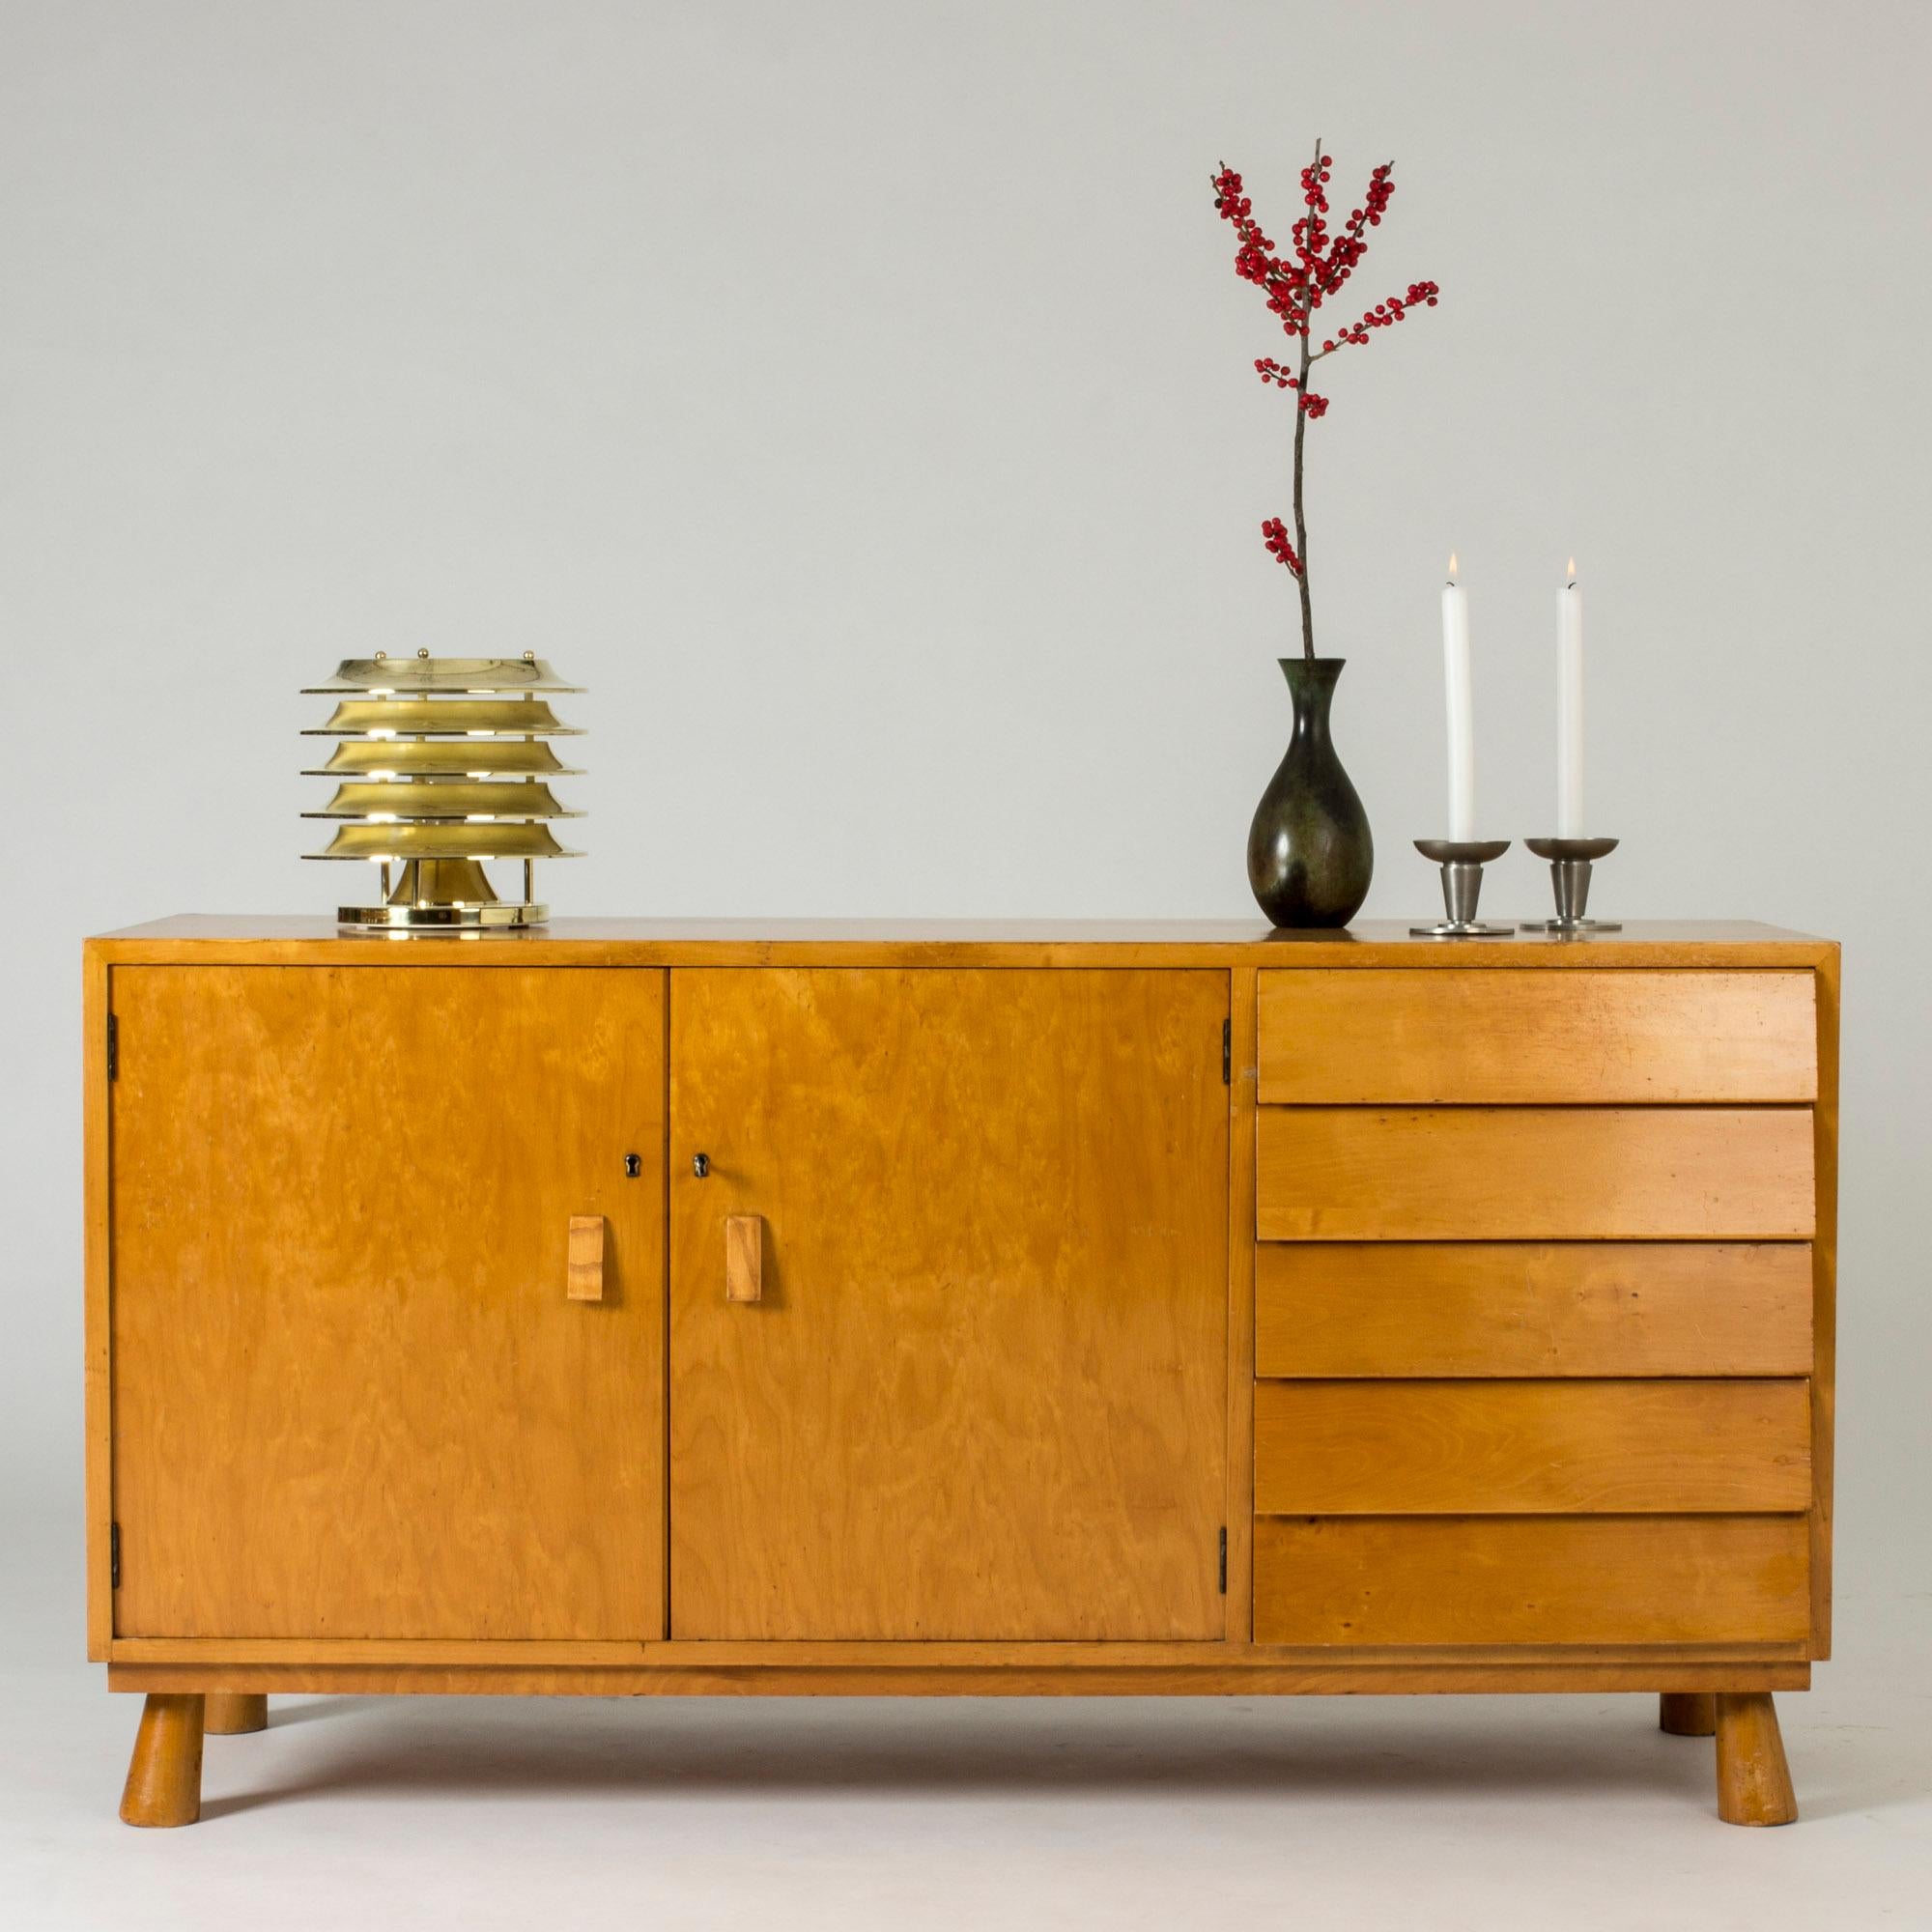 Striking Swedish functionalist sideboard from the 1930s. Neat size, with a set of drawers with slanted fronts on one side. Matching slanted handles on the cabinet doors. Chunky, angled legs both harmonize with the sideboard’s overall lines and